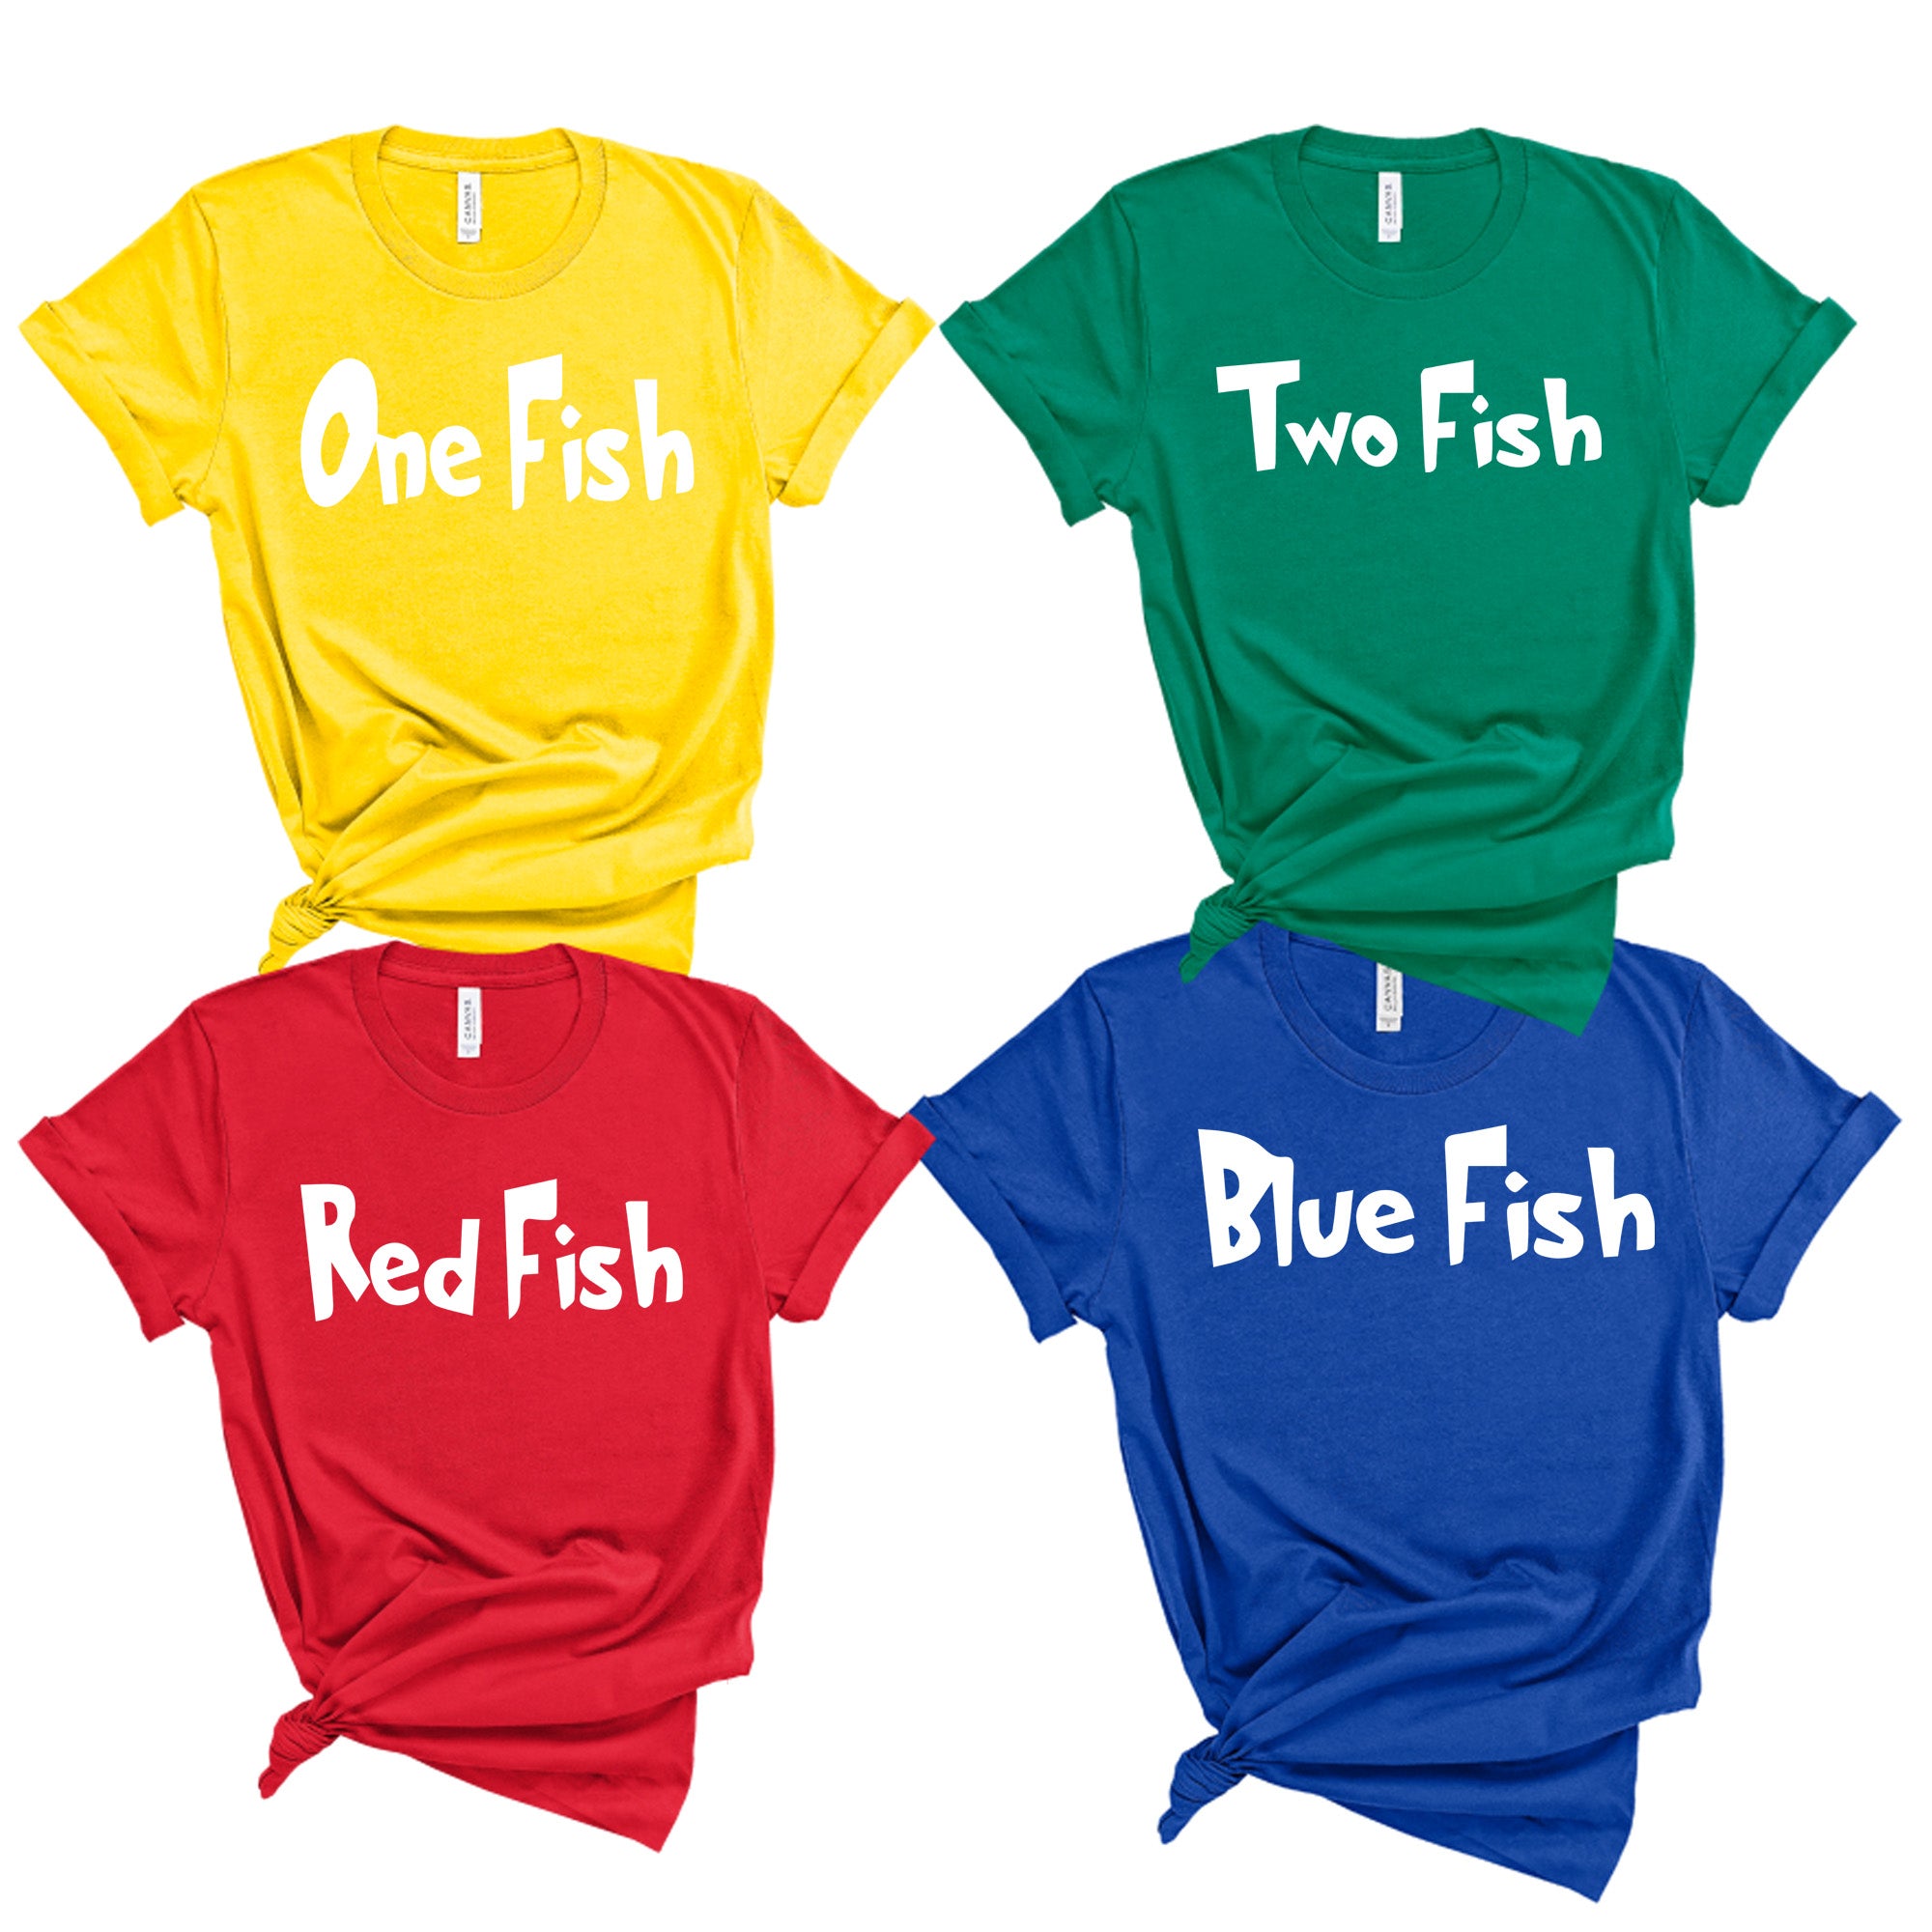 One Fish, Two Fish Group Costumes